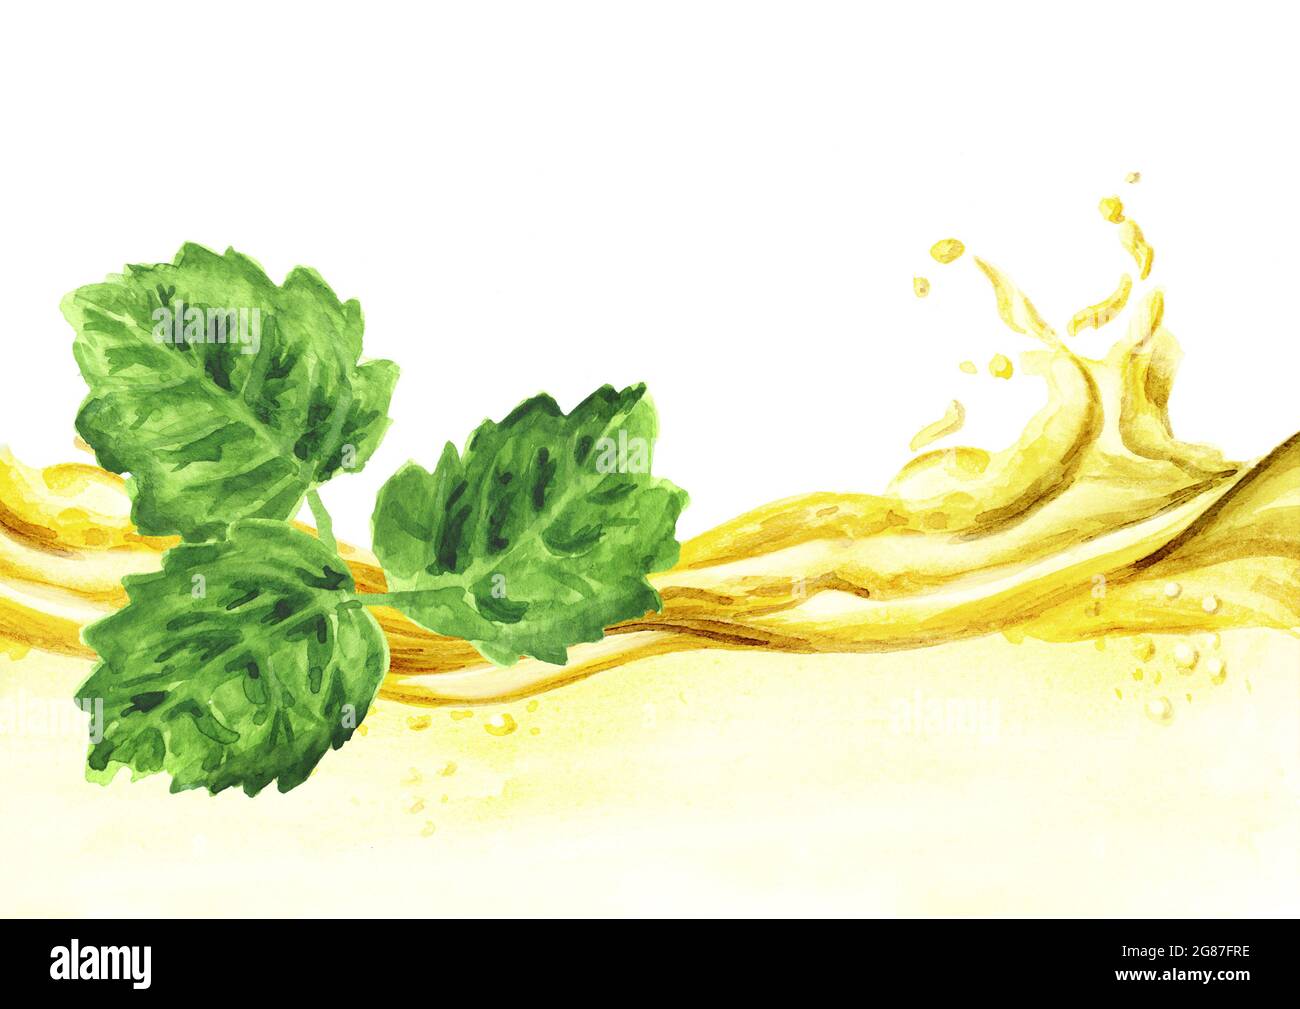 Patchouli or Pogostemon cablini essential oil wave. Hand drawn watercolor illustration isolated on white background Stock Photo